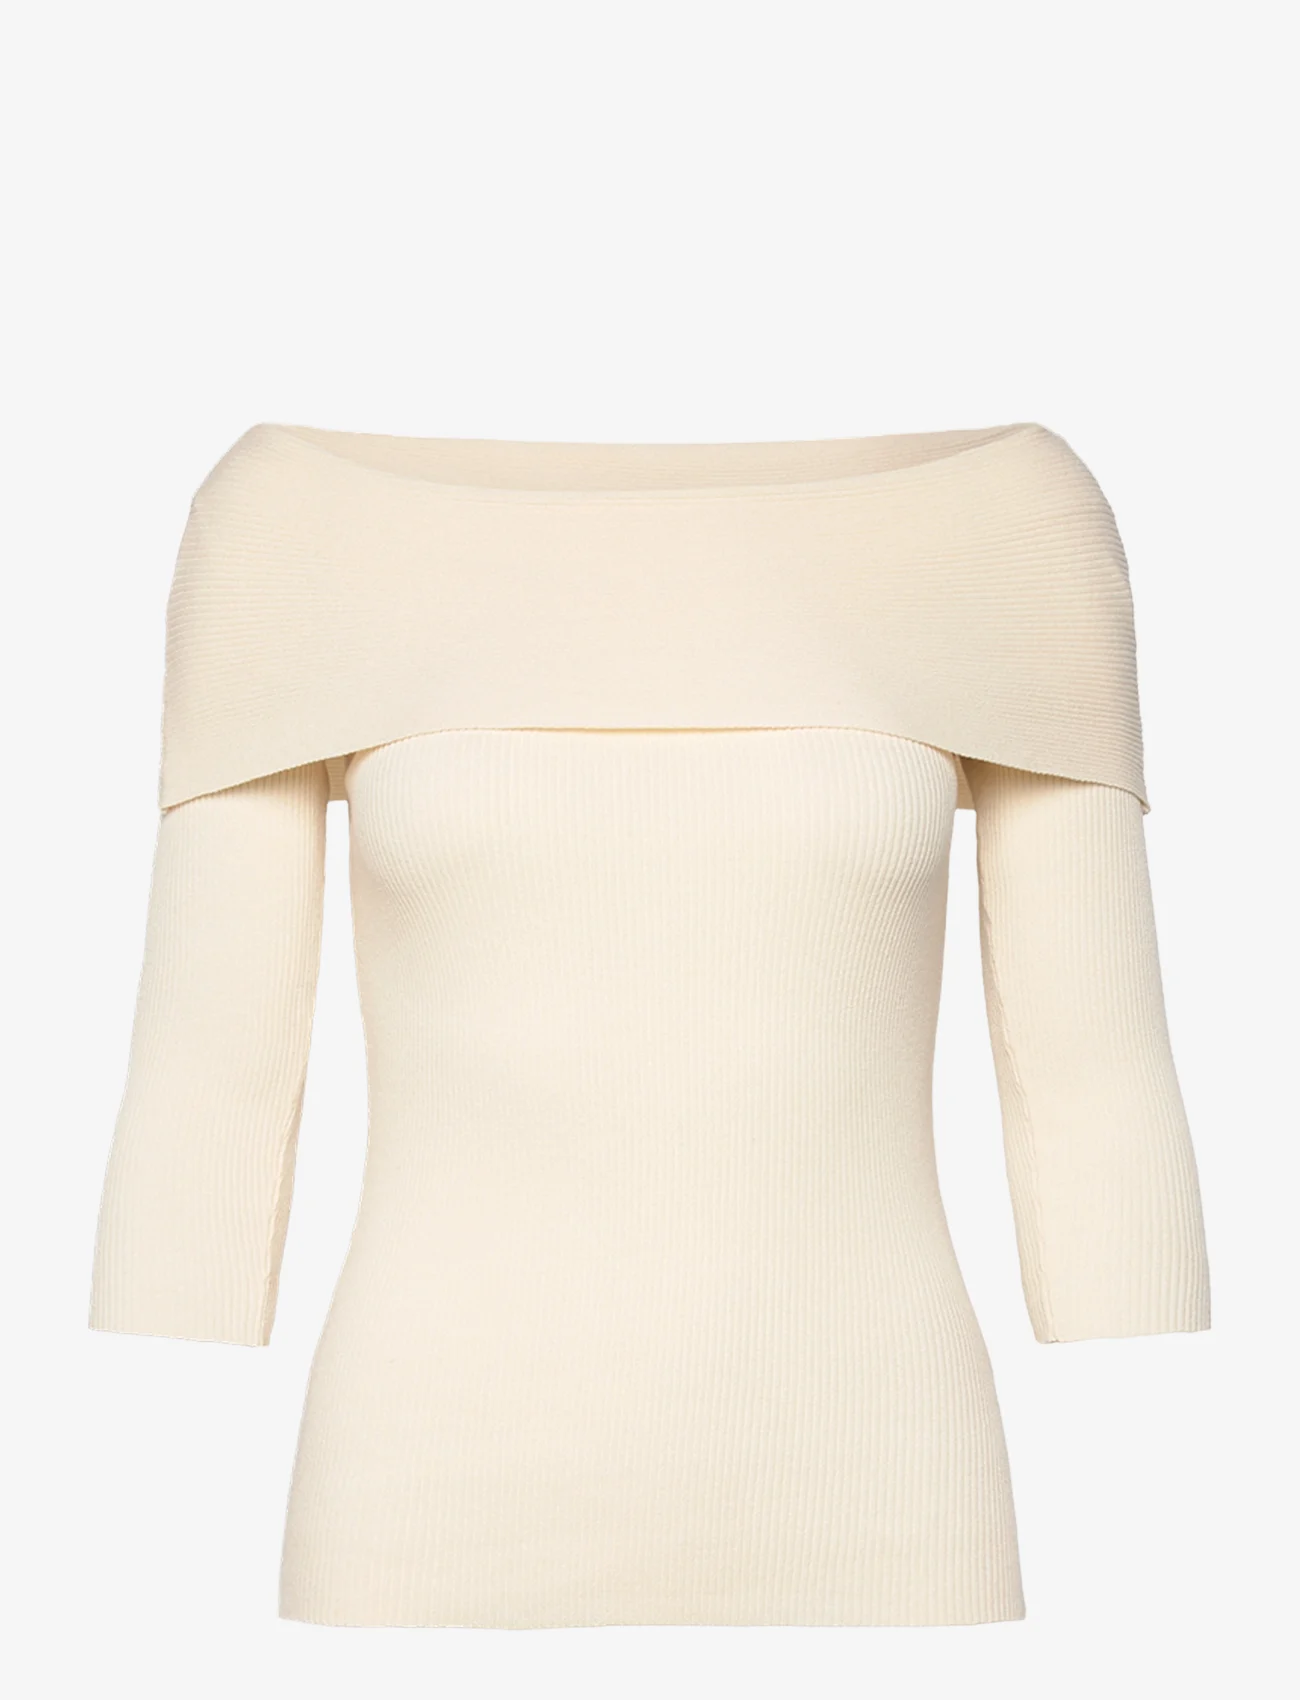 Soaked in Luxury - SLIndianna Offshoulder Pullover - langärmlige tops - pearled ivory - 0